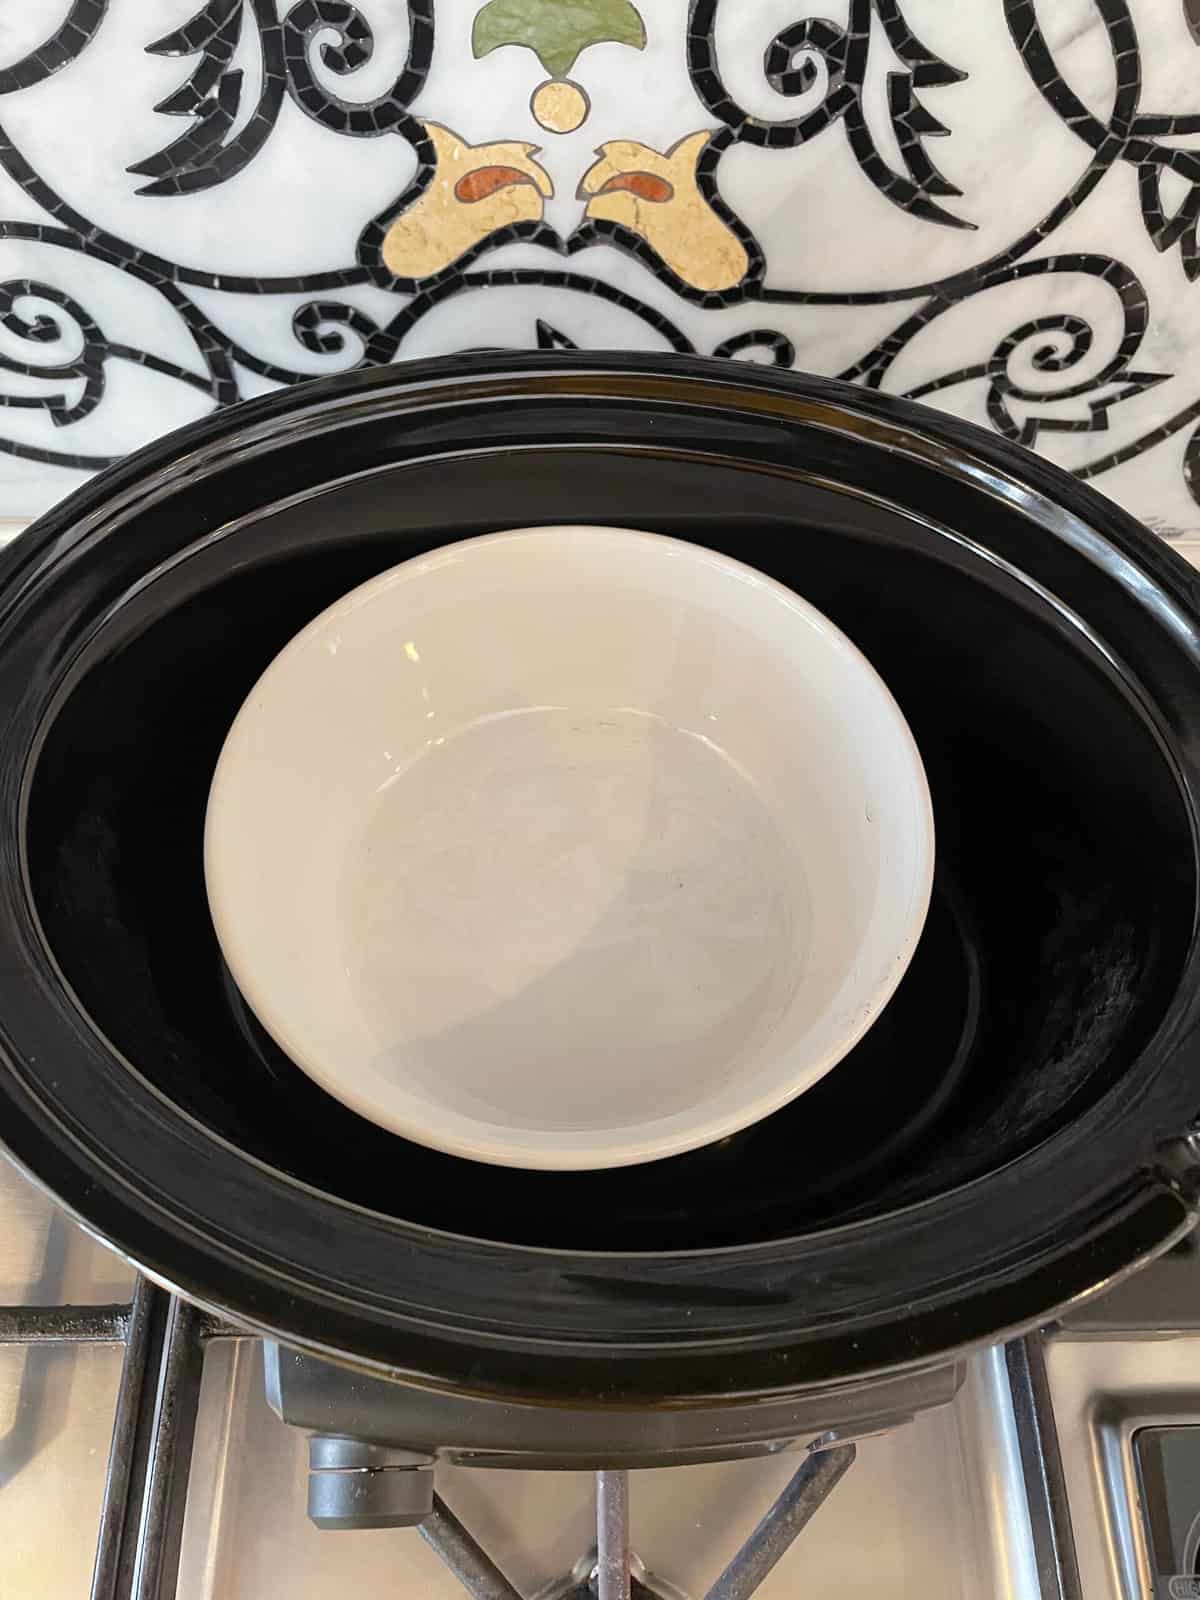 A small oven proof bowl inside a large crock pot bowl